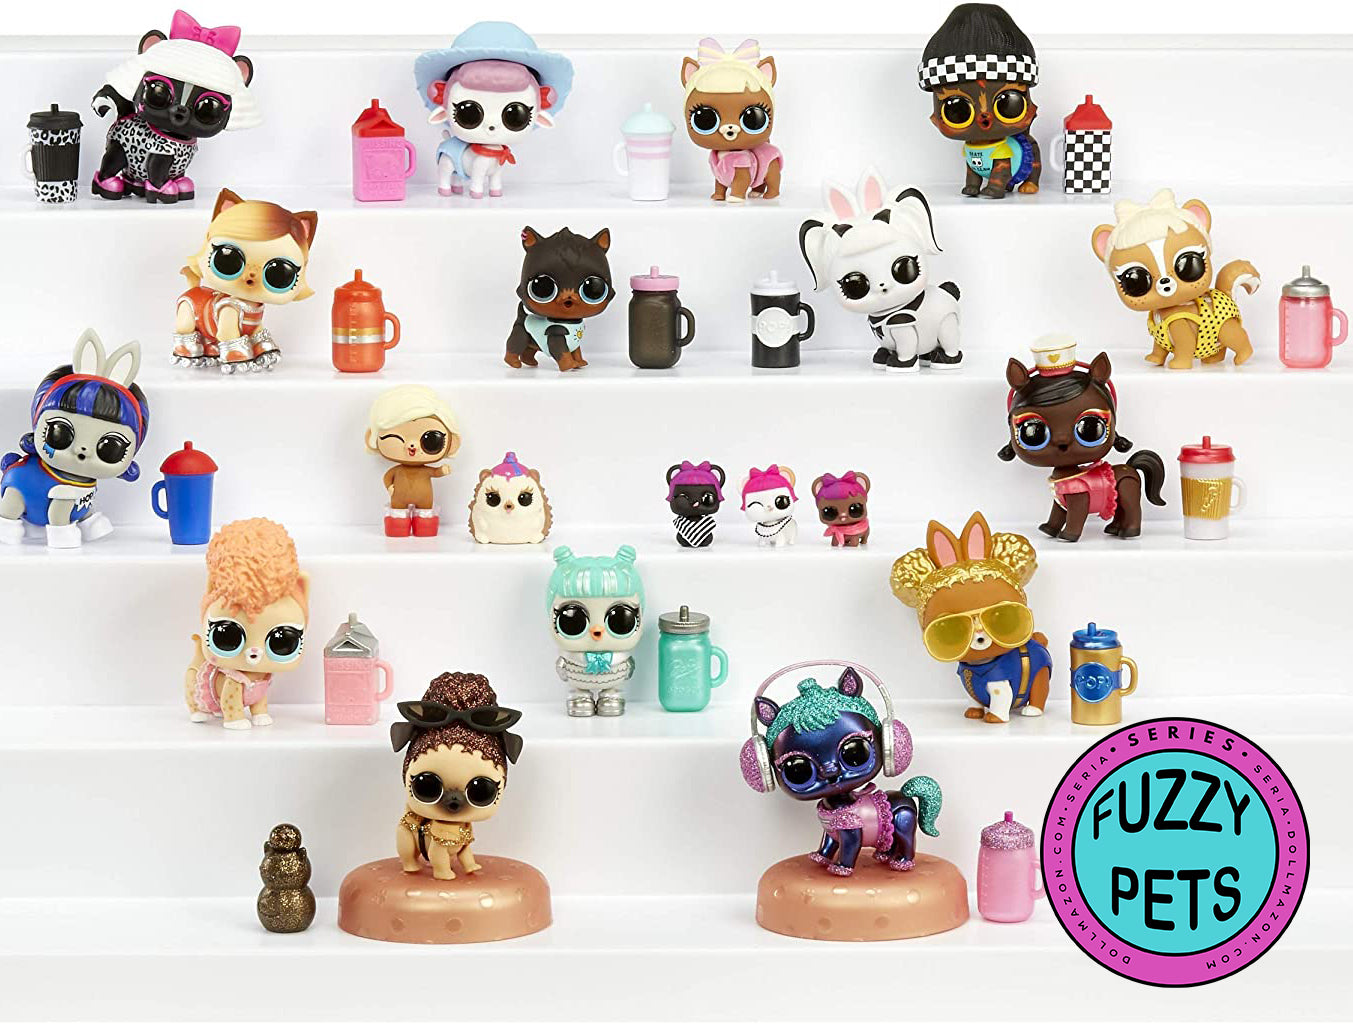 Collect all the adorable new pets and surprises with L.O.L. Surprise! Fuzzy Pets. The big revelation has here — L.O.L. Surprise! The Fuzzy Pets have had a fun makeover! The Makeover Series is all about transformation, from fresh surprises to new looks.